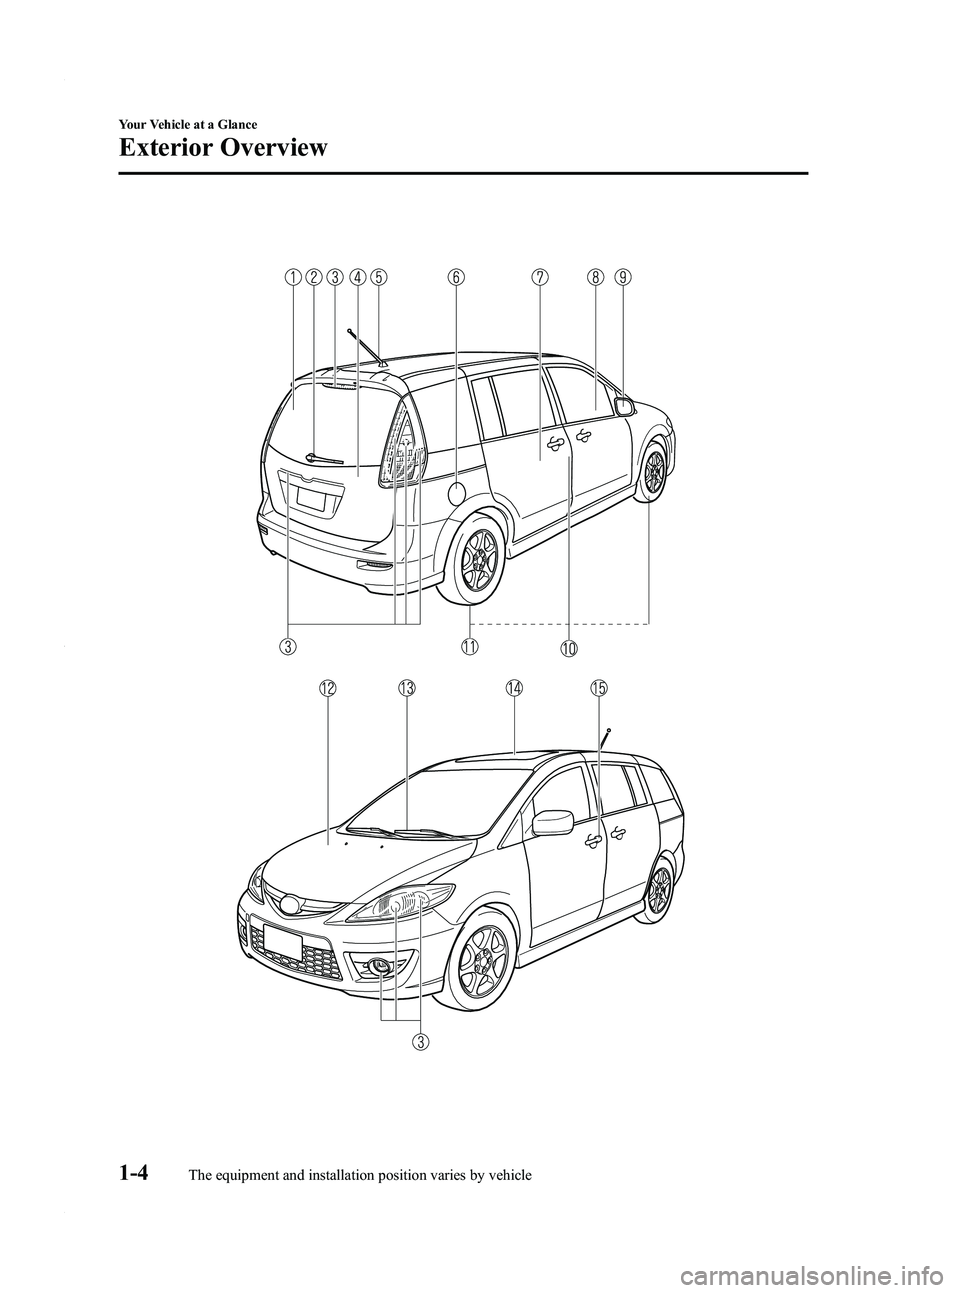 MAZDA MODEL 5 2010  Owners Manual Black plate (10,1)
1-4
Your Vehicle at a Glance
The equipment and installation position varies by vehicle
Exterior Overview
Mazda5_8AU7-EA-09H_Edition4 Page10
Tuesday, March 30 2010 1:9 PM
Form No.8AU